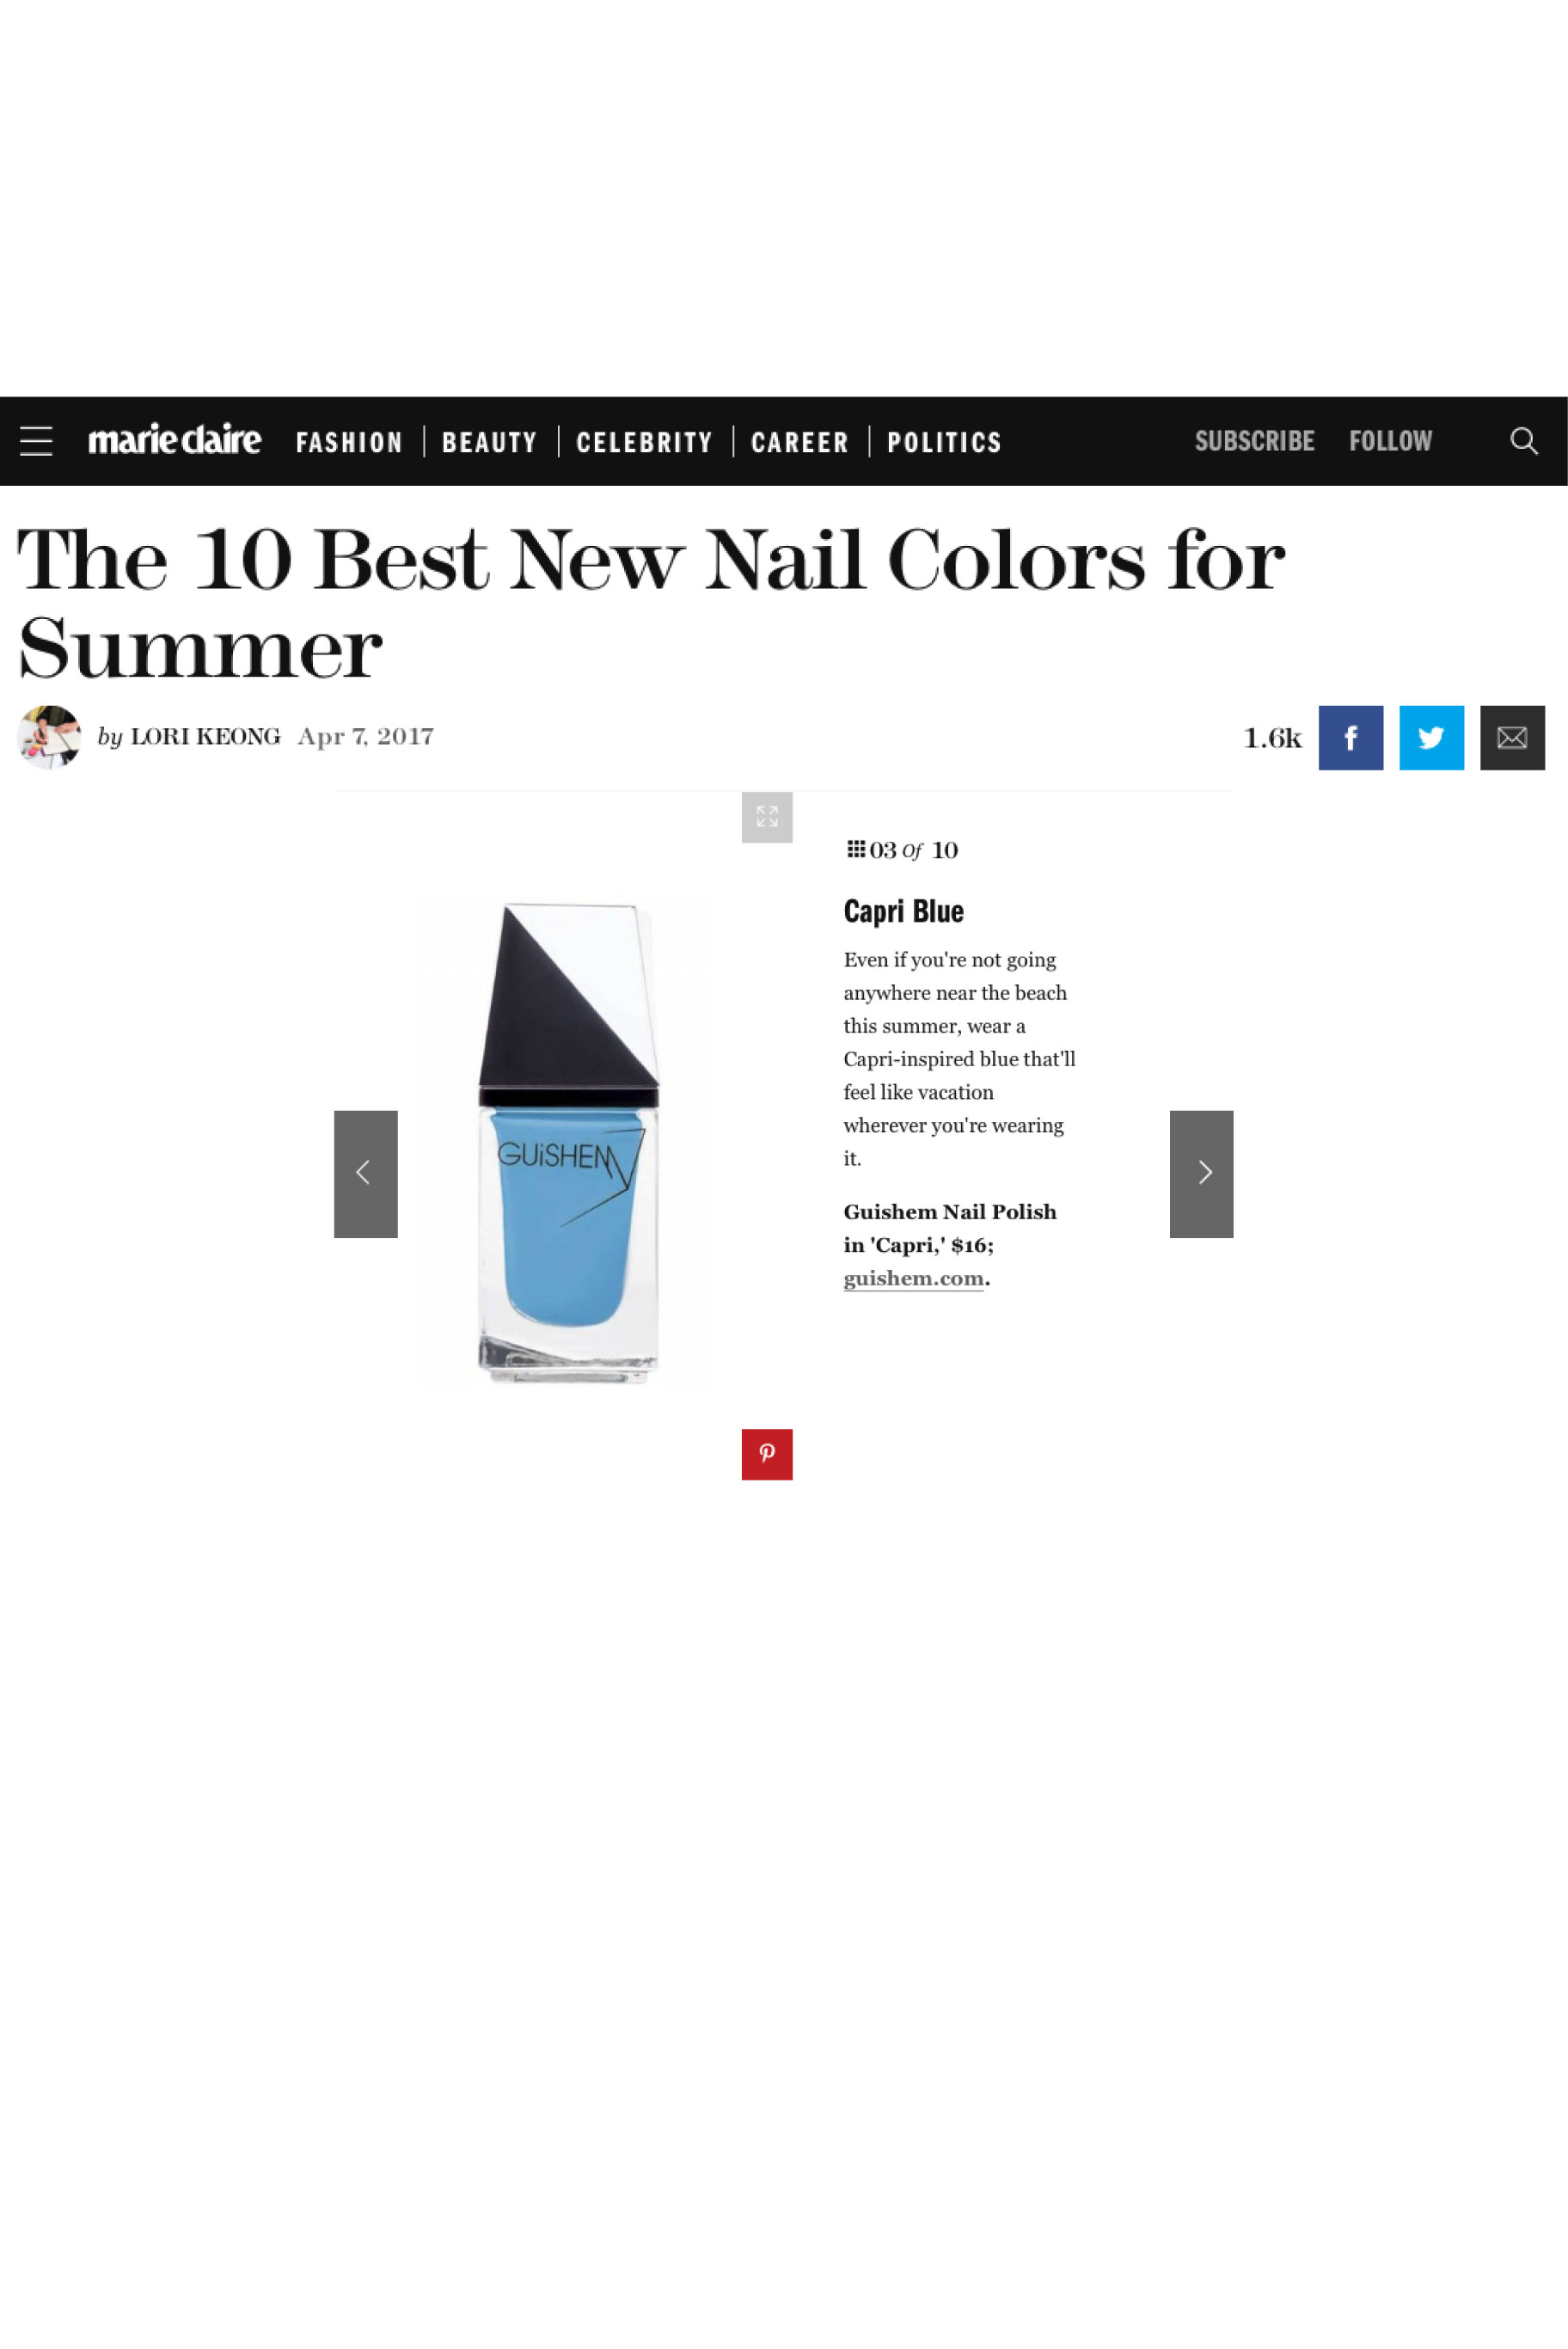 The 10 Best New Nail Colors for Summer